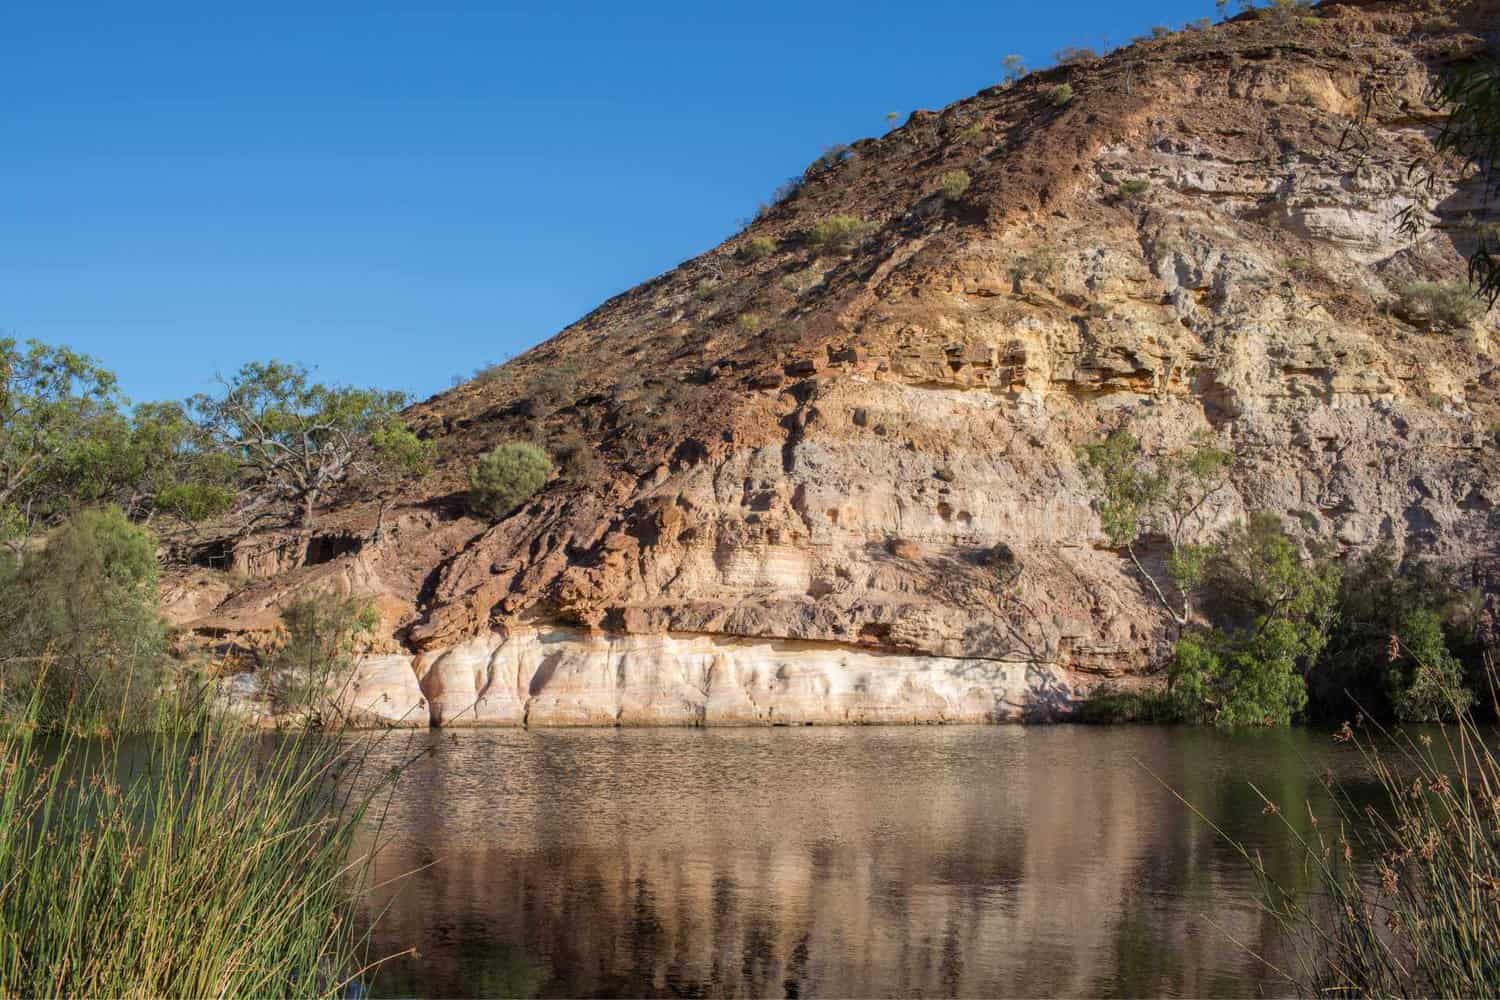 Ellendale Pool, a natural waterhole surrounded by steep rocky cliffs and lush vegetation, located near Geraldton. A serene oasis that is a favorite for free camping enthusiasts seeking the beauty of Western Australia's natural landscapes.